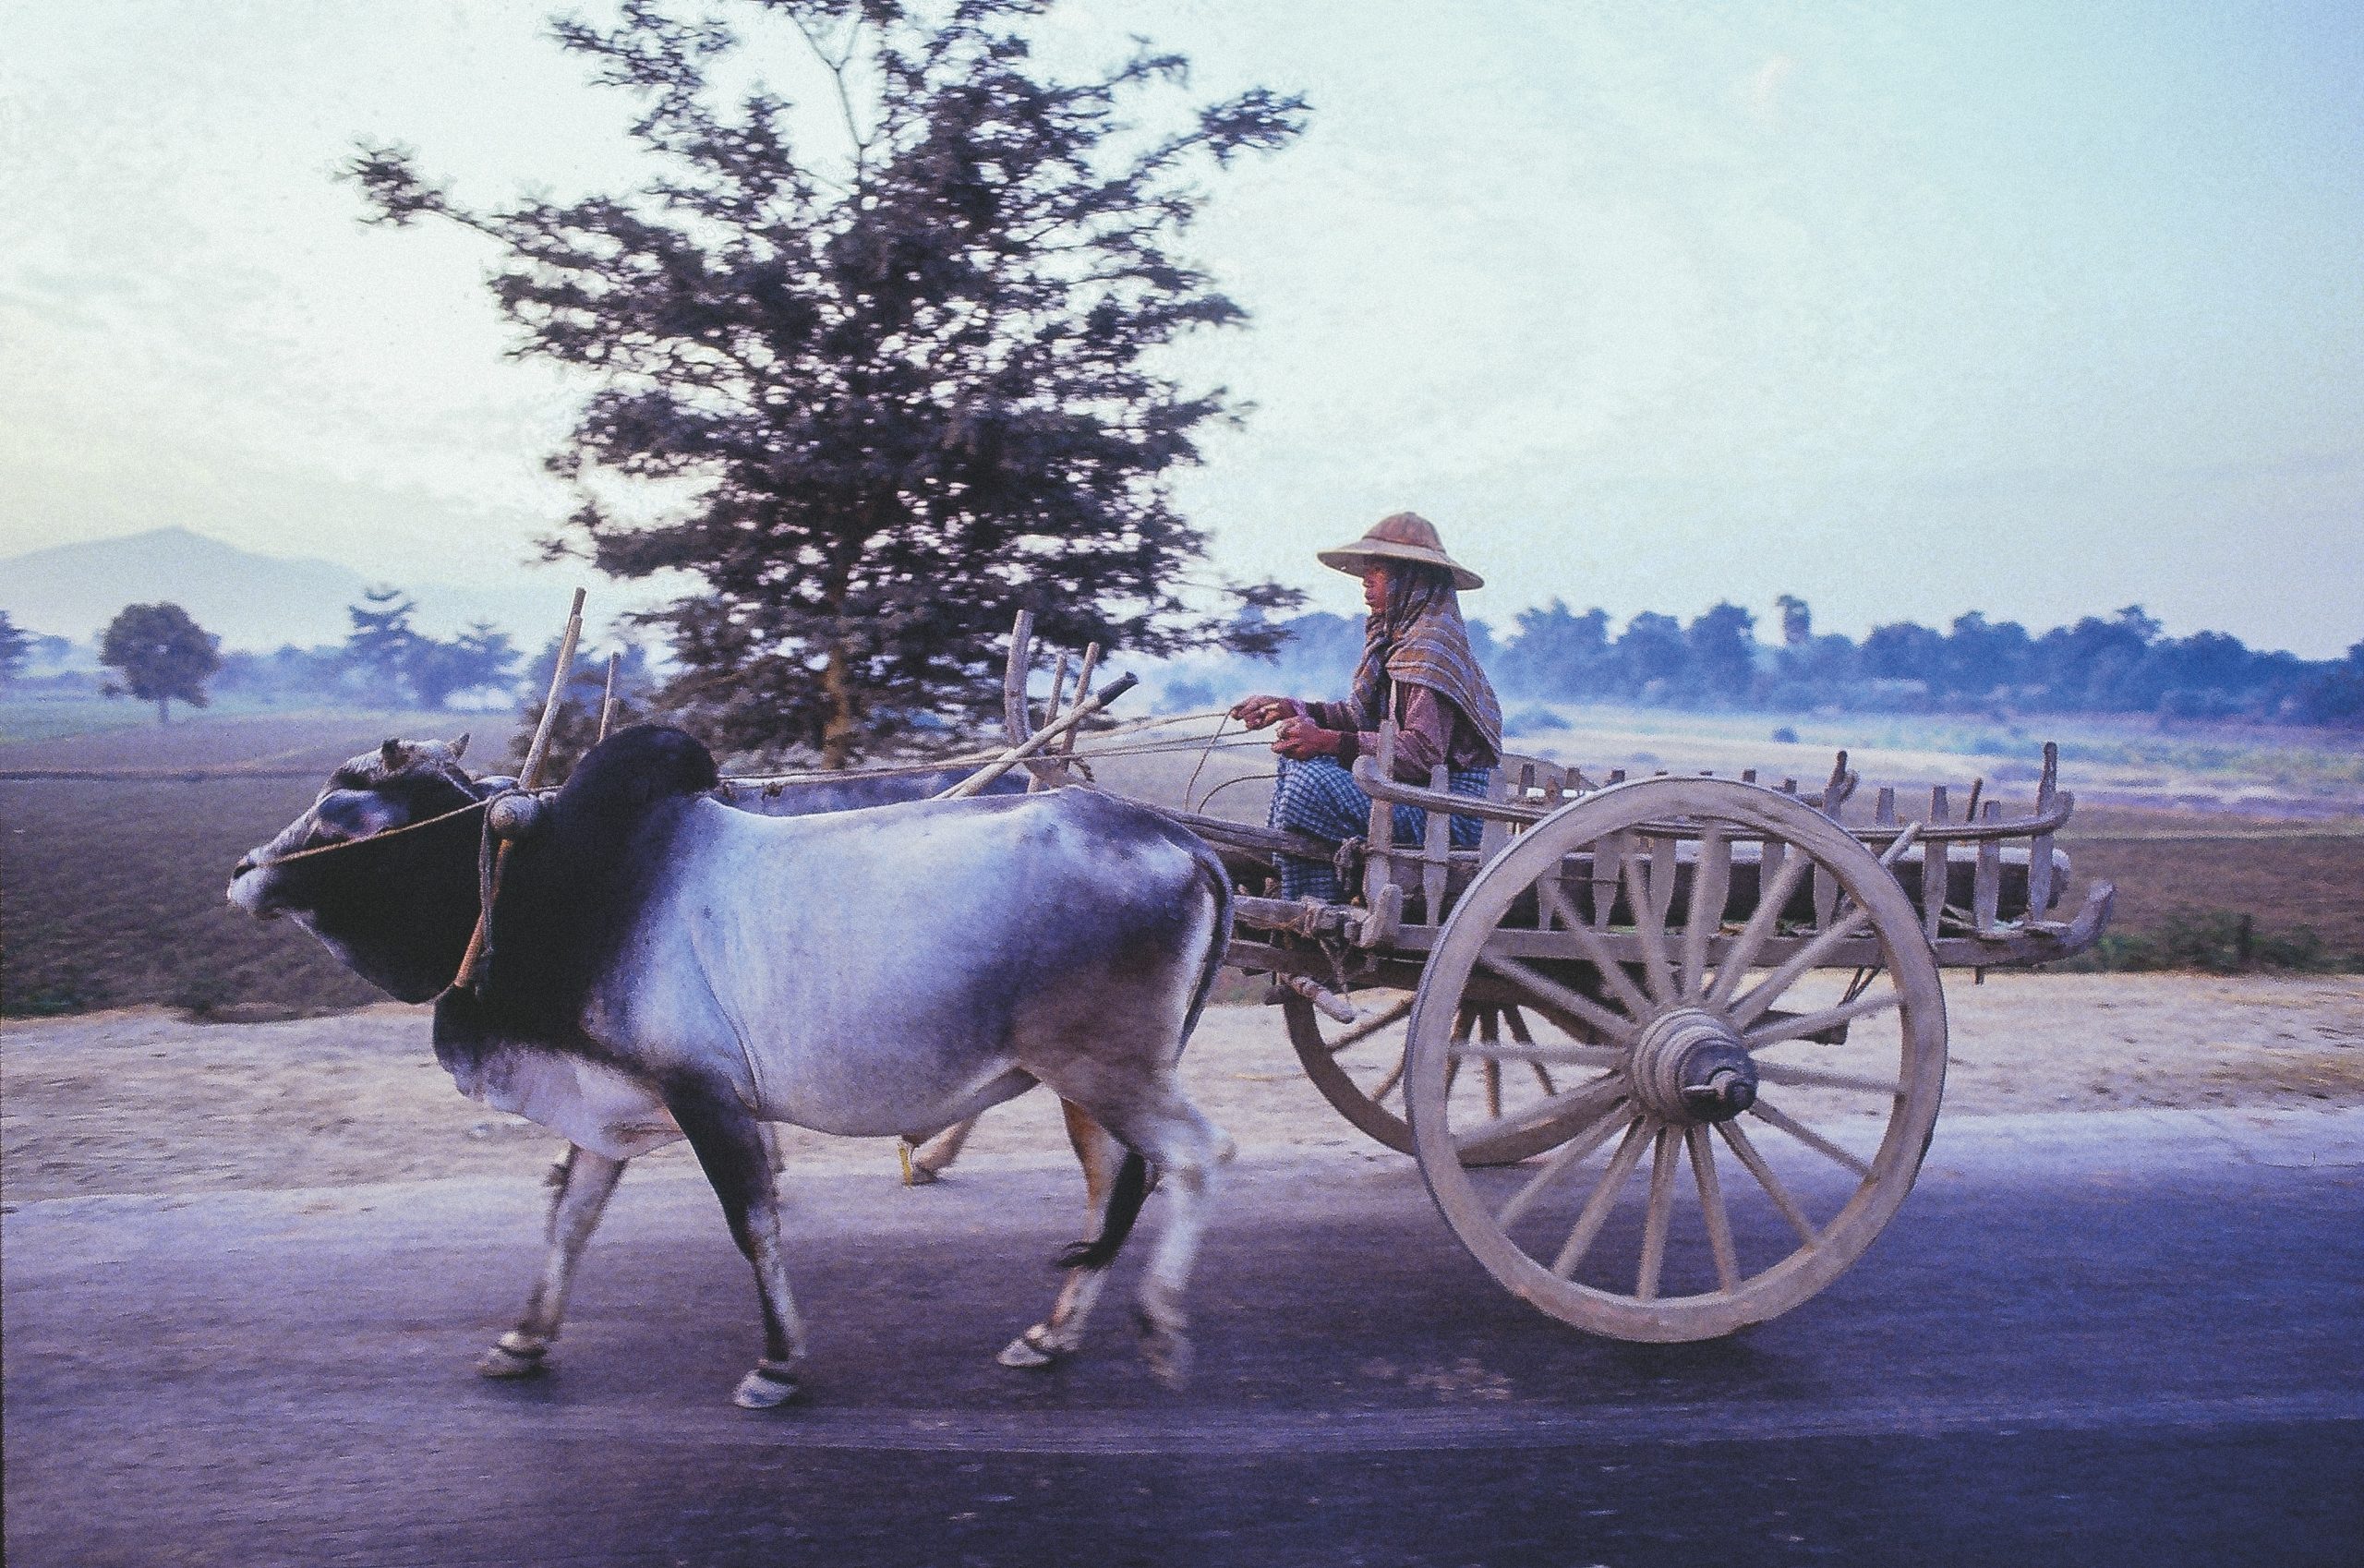 A water buffalo is pulling wooden carts on the road. A man sits on them holding the reins. In the background there is a field with individual trees.